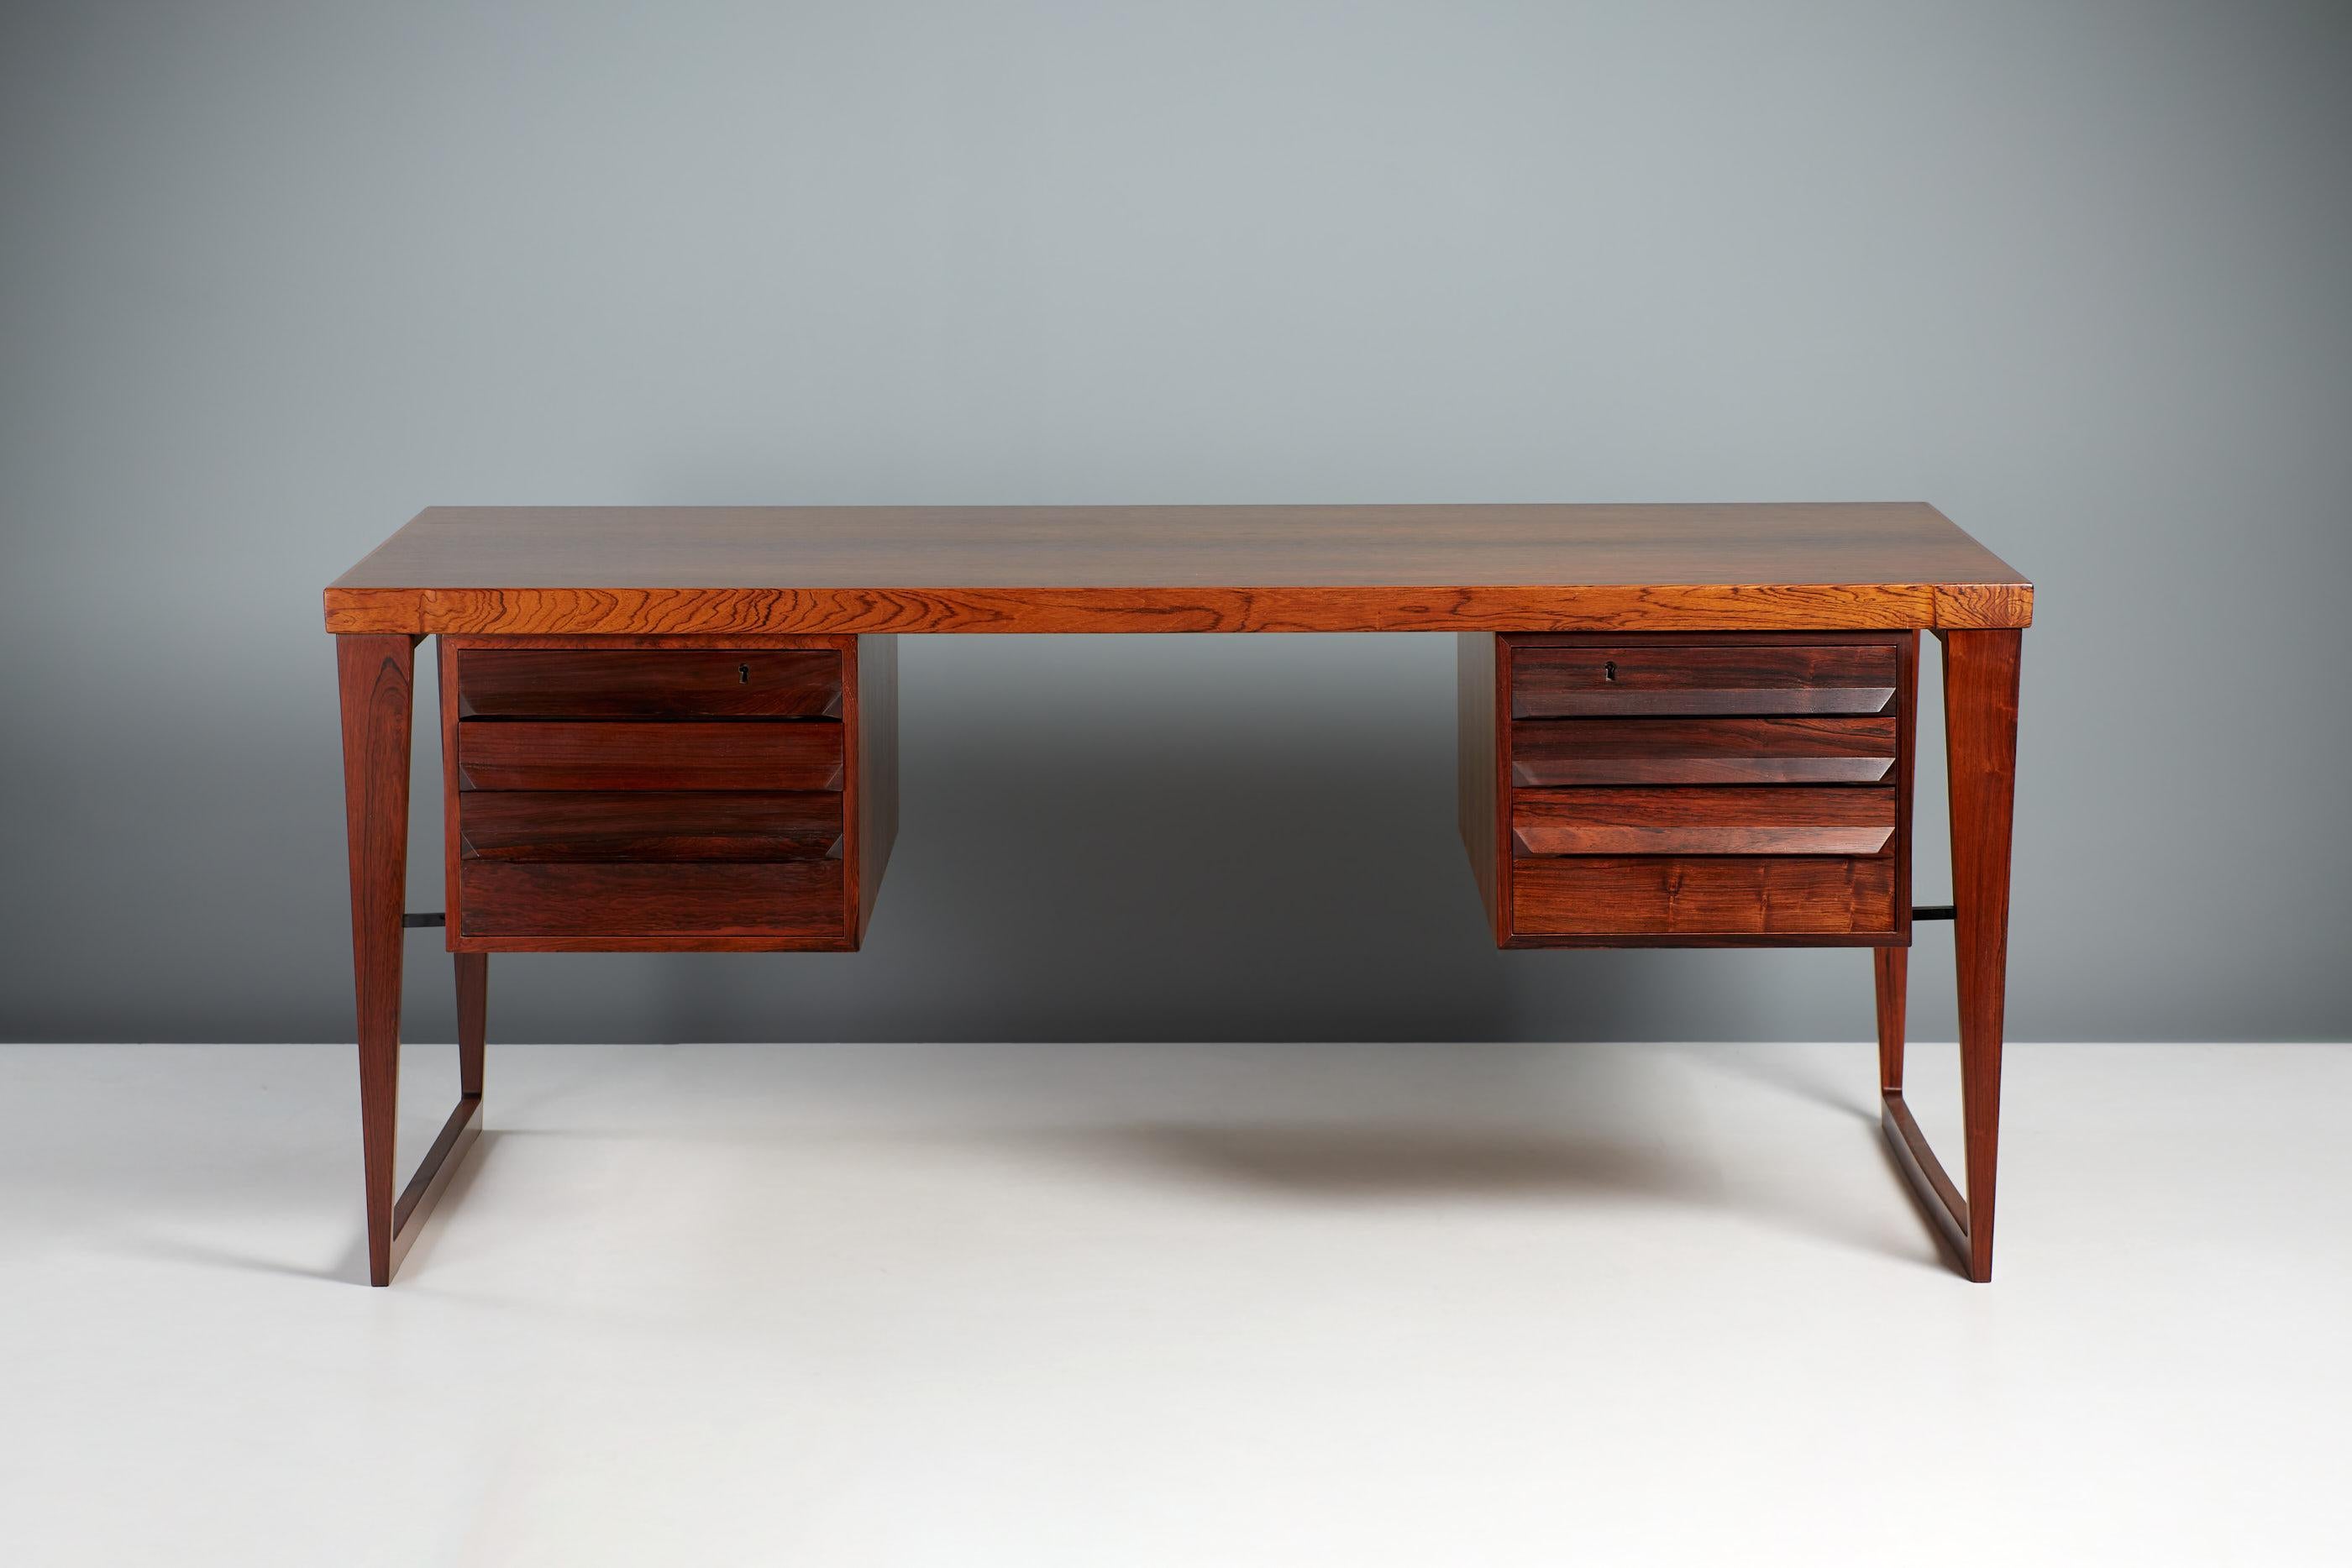 Kai Kristiansen Model 30 Desk

This iconic desk from Danish master Kai Kristiansen features elegant sled legs with 2 drawer units hung on either side. The units have drawers to the front and cupboards to the rear. It was produced in highly figured